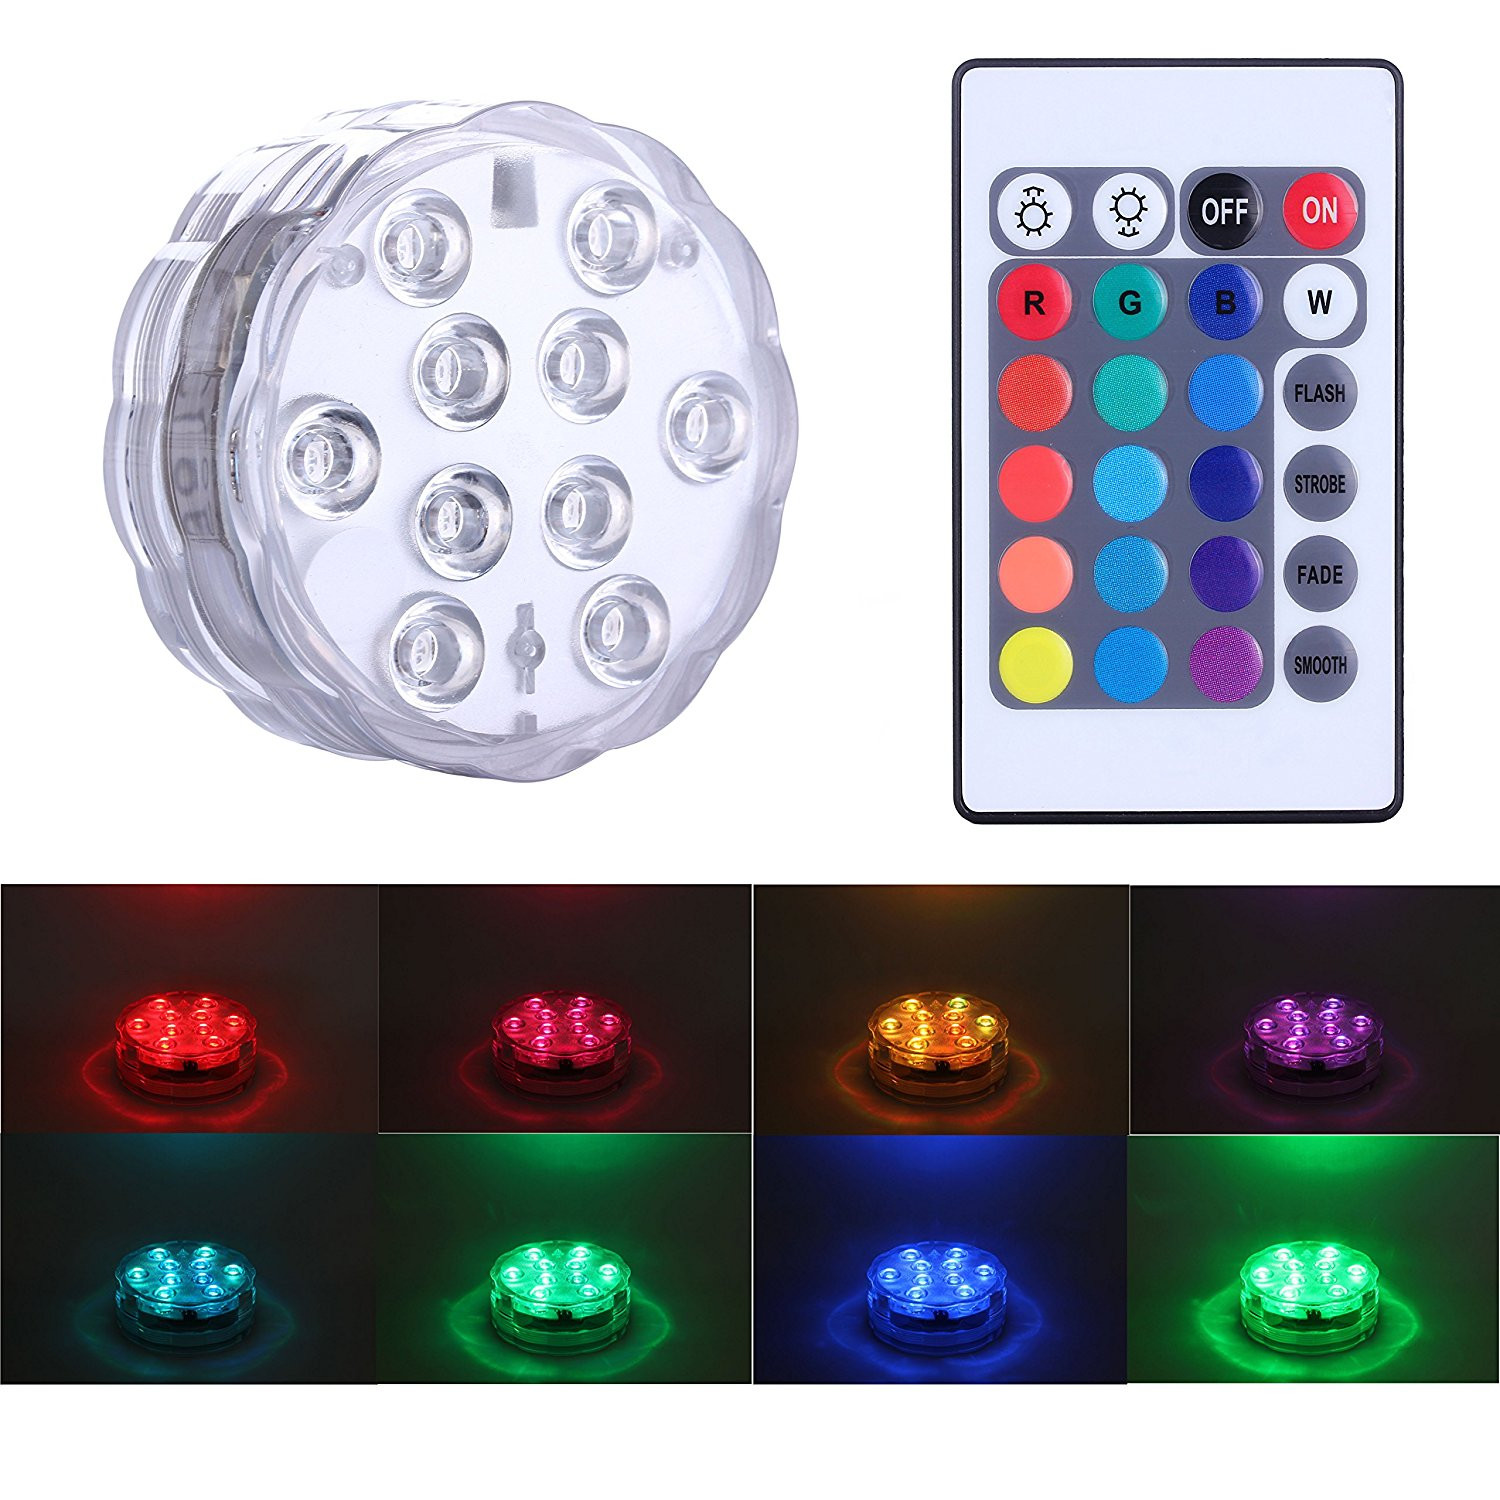 13 Unique Color Changing Submersible Led Vase Lights 2024 free download color changing submersible led vase lights of submersible led lights with remote control alilimall multi color within submersible led lights with remote control alilimall multi color changin